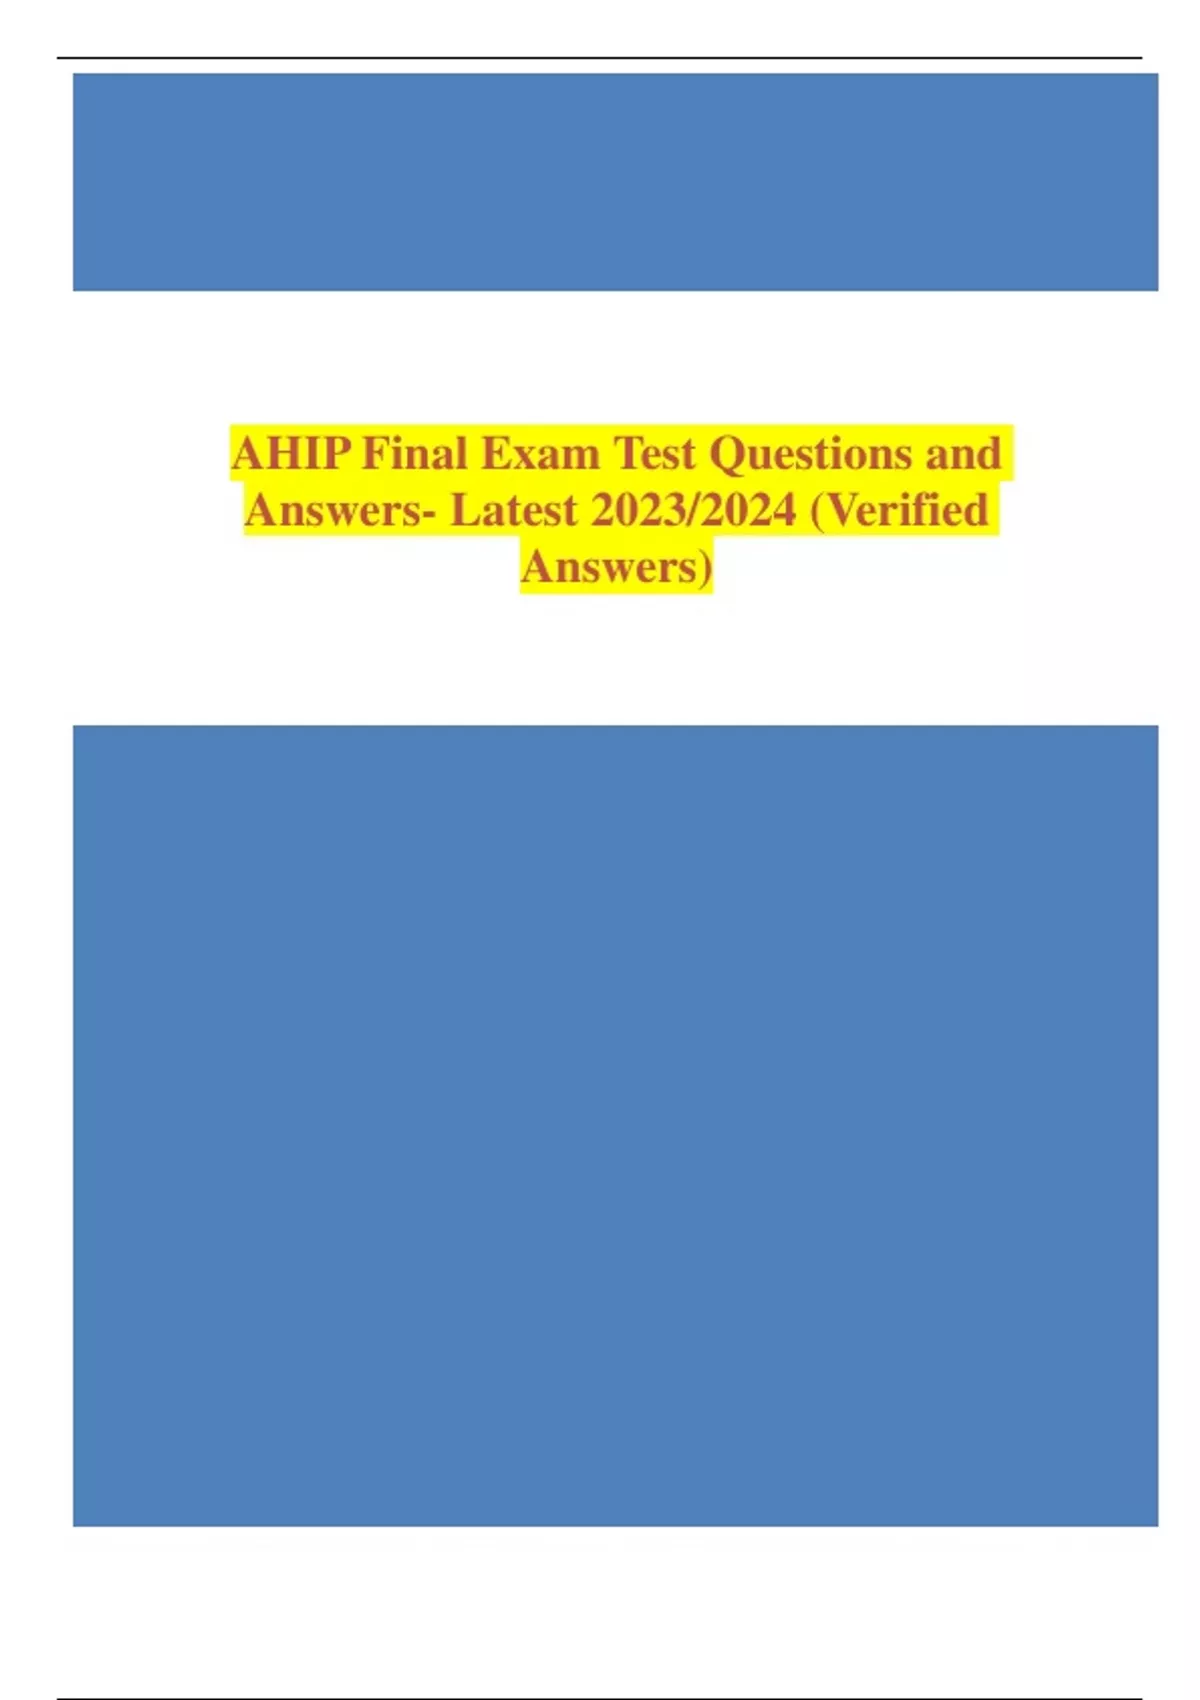 AHIP Final Exam Test Questions and Answers Latest 2023/2024 (Verified